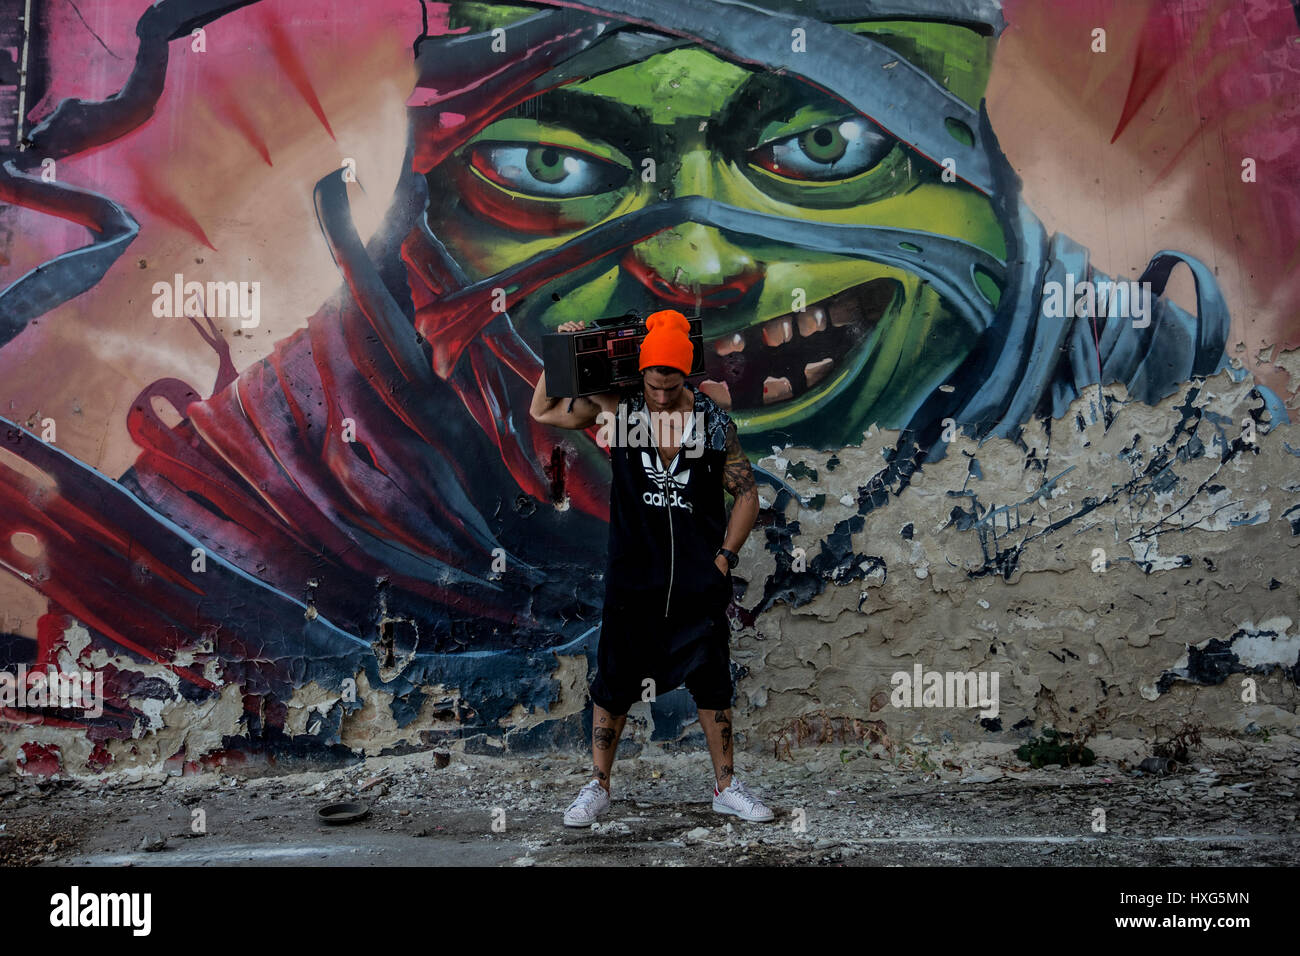 Athlete is standing in front of a graffiti mural Stock Photo